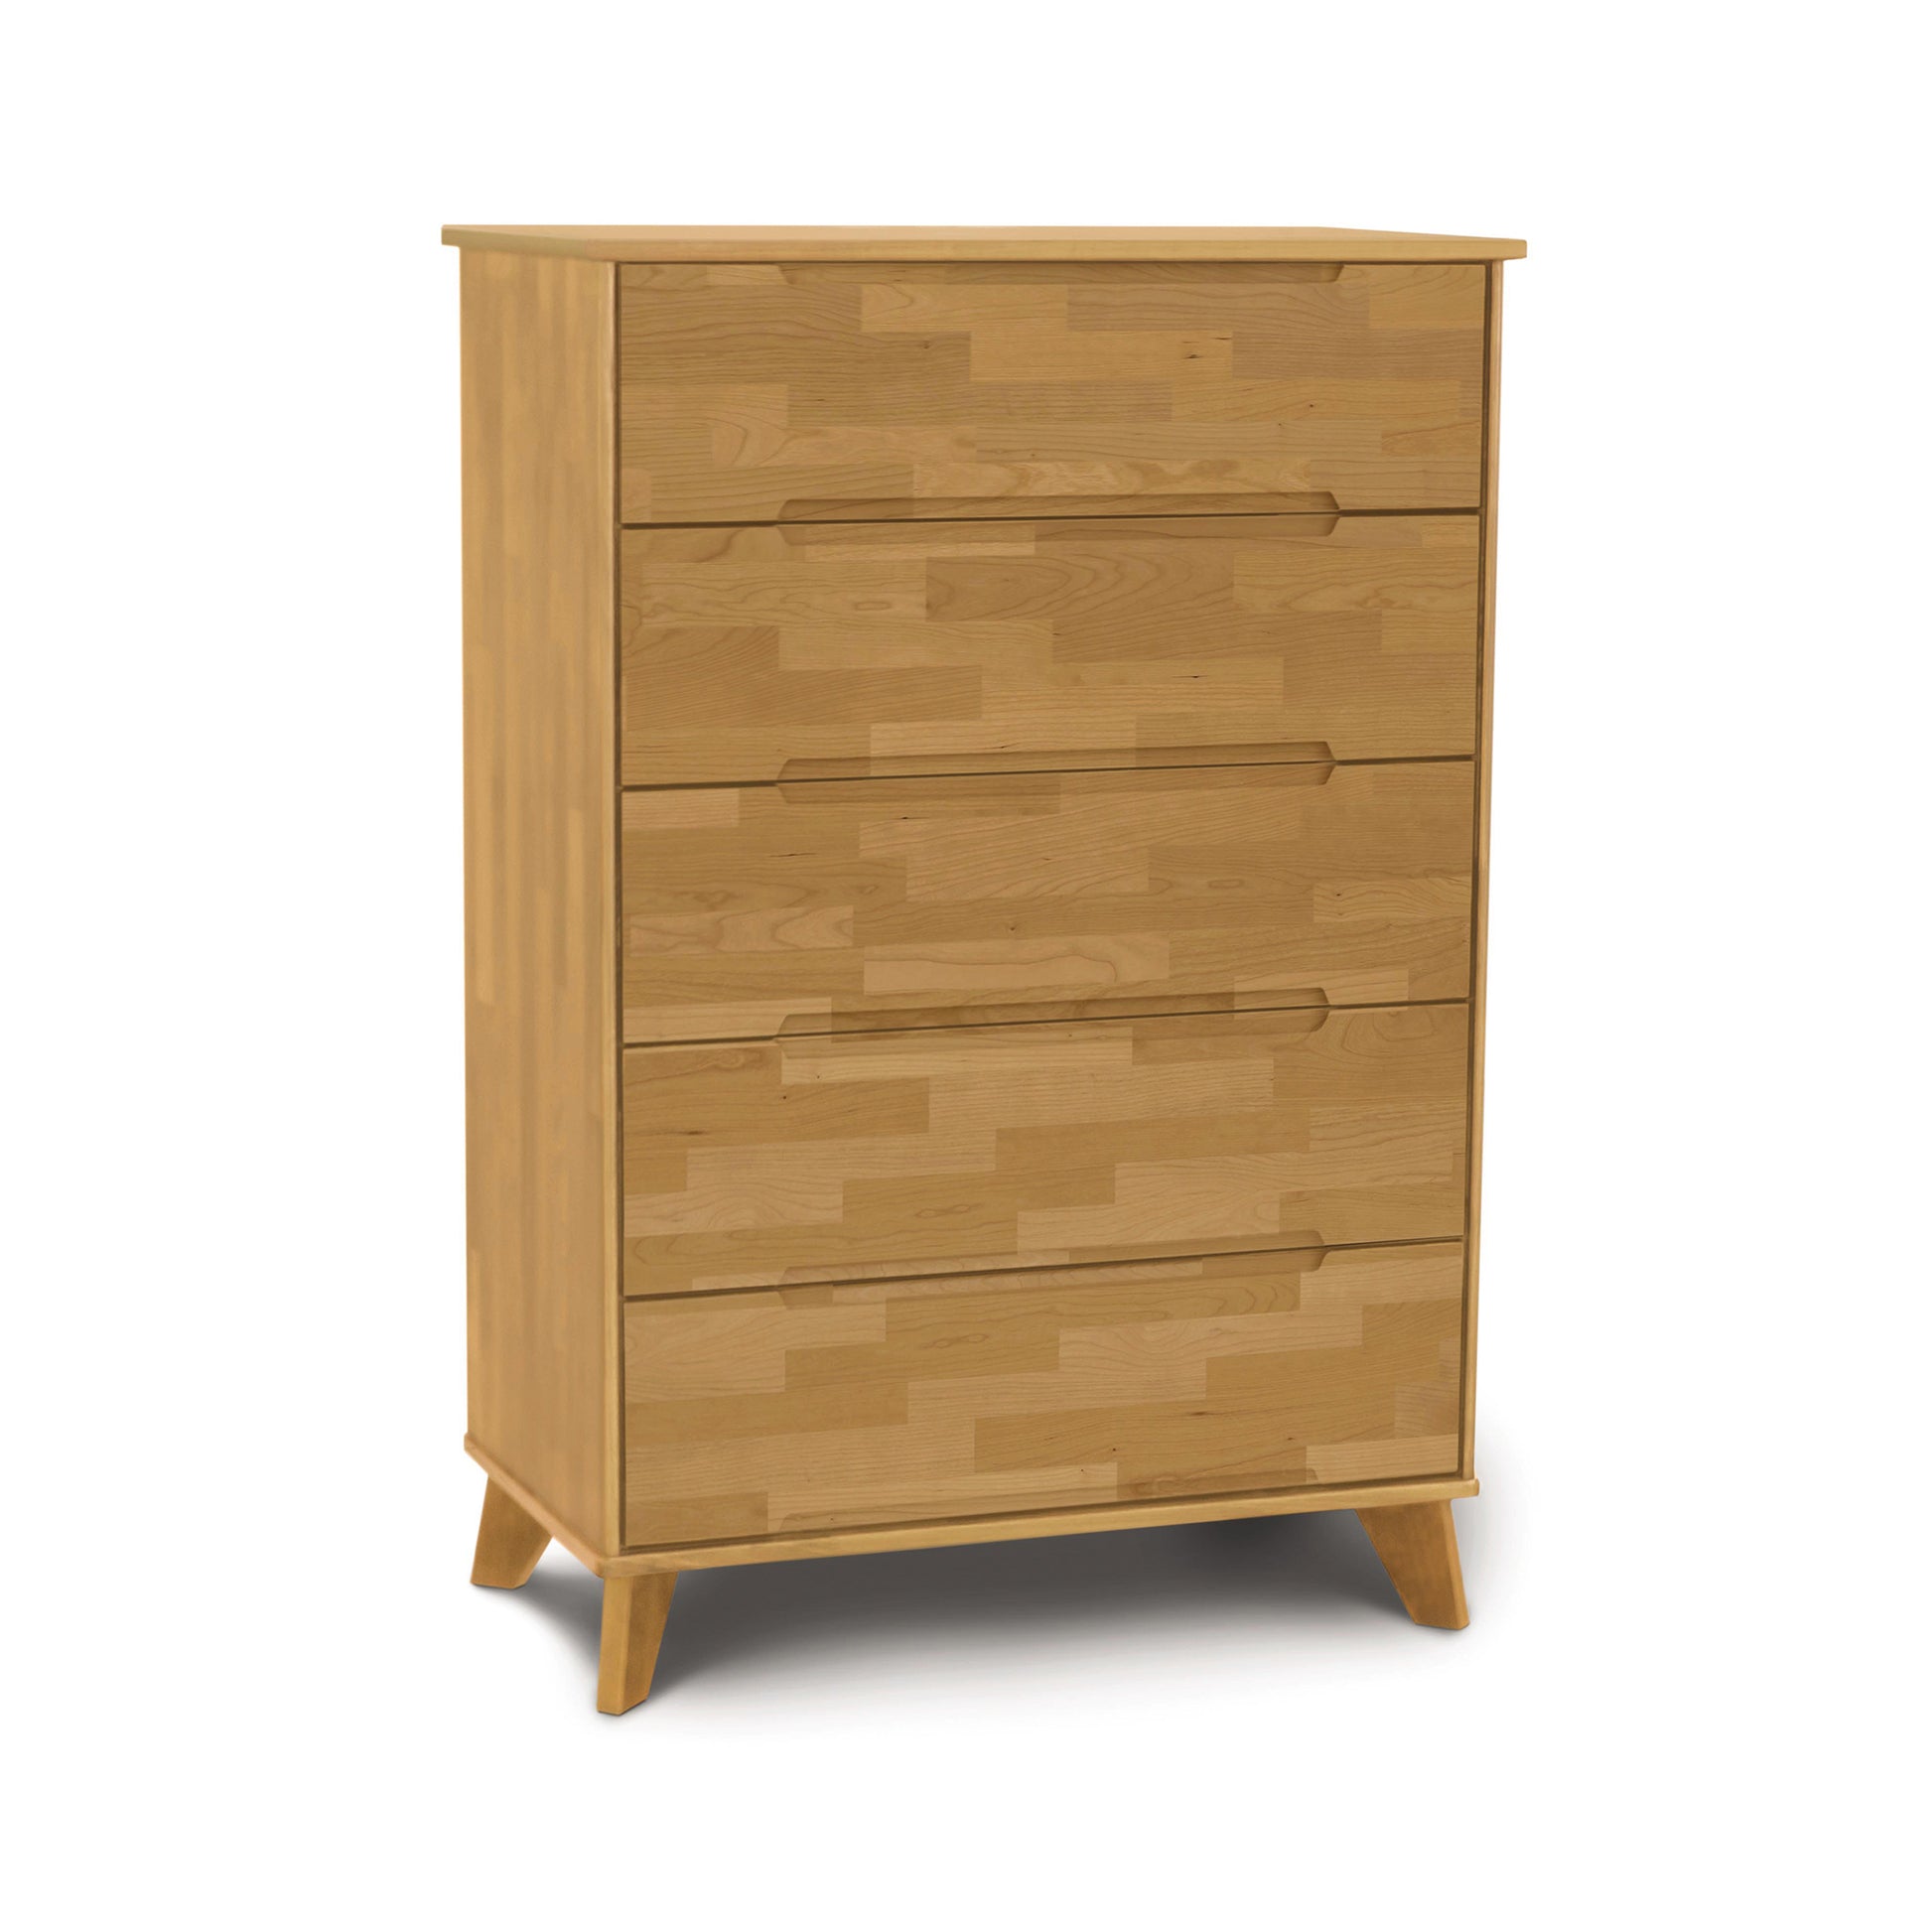 A Linn 5-Drawer Wide Chest made by Copeland Furniture, a mid-century modern design, crafted from upcycled North American hardwood, set against a white background.